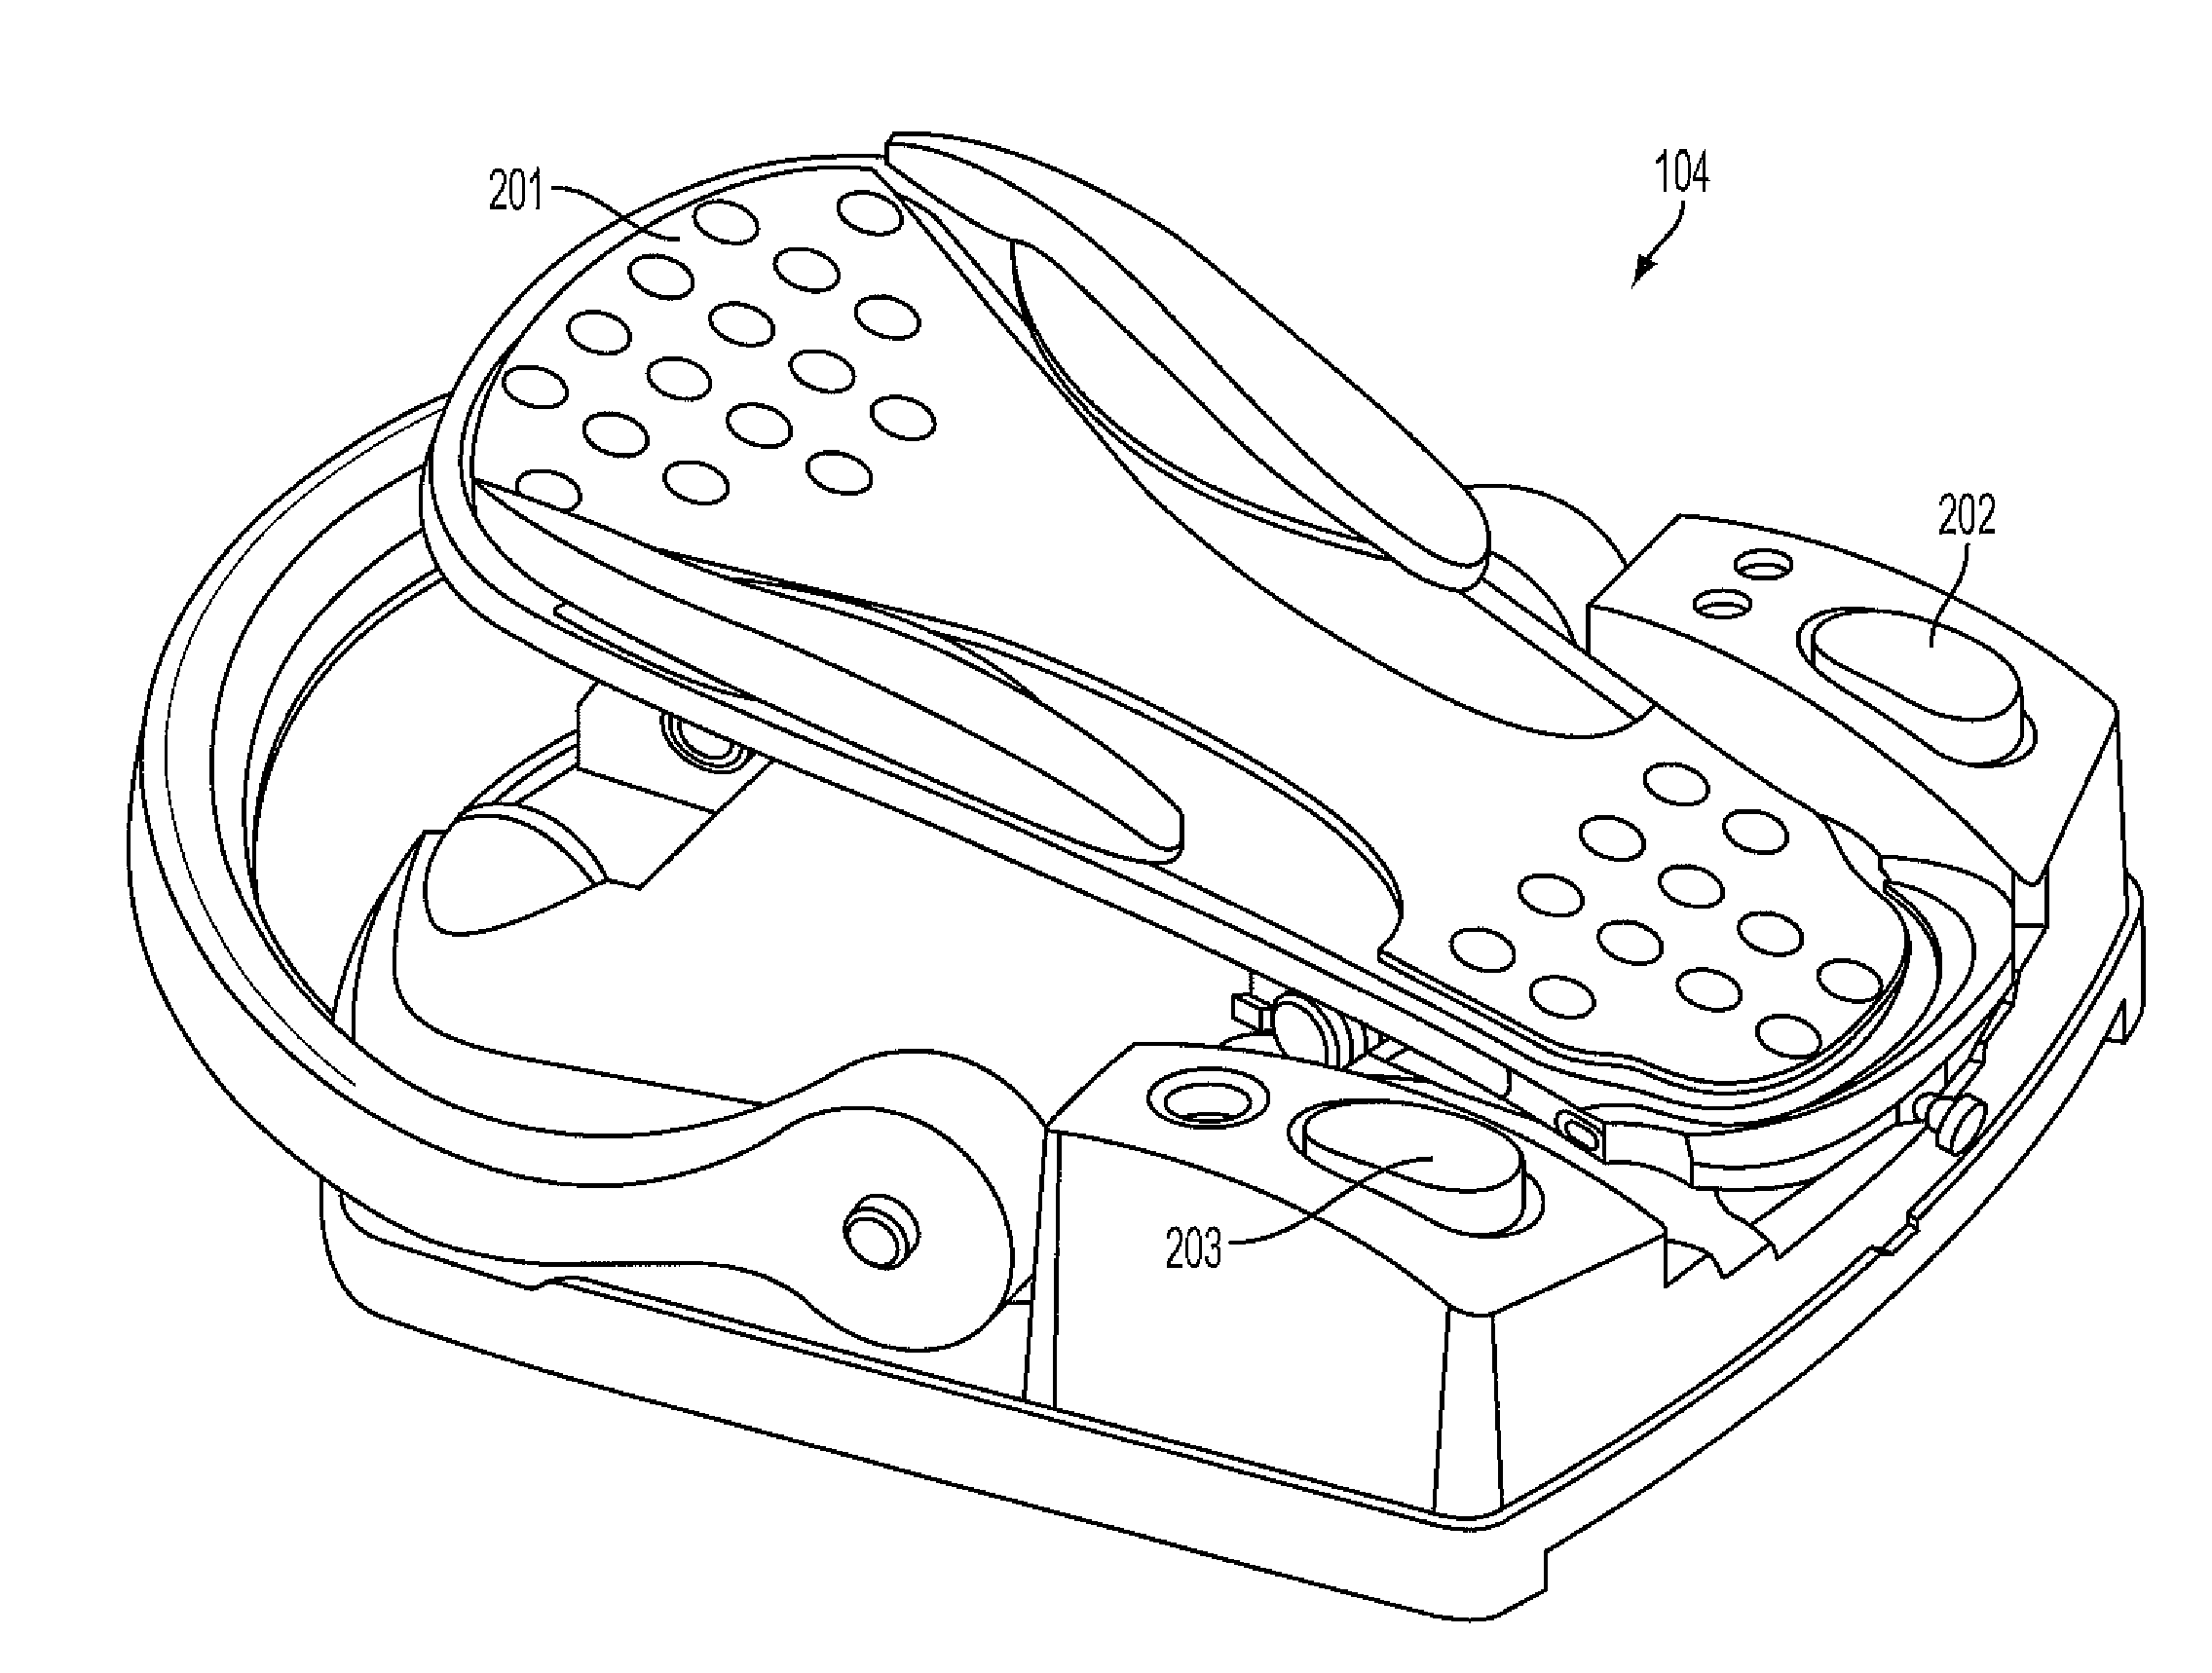 Multifunction foot pedal